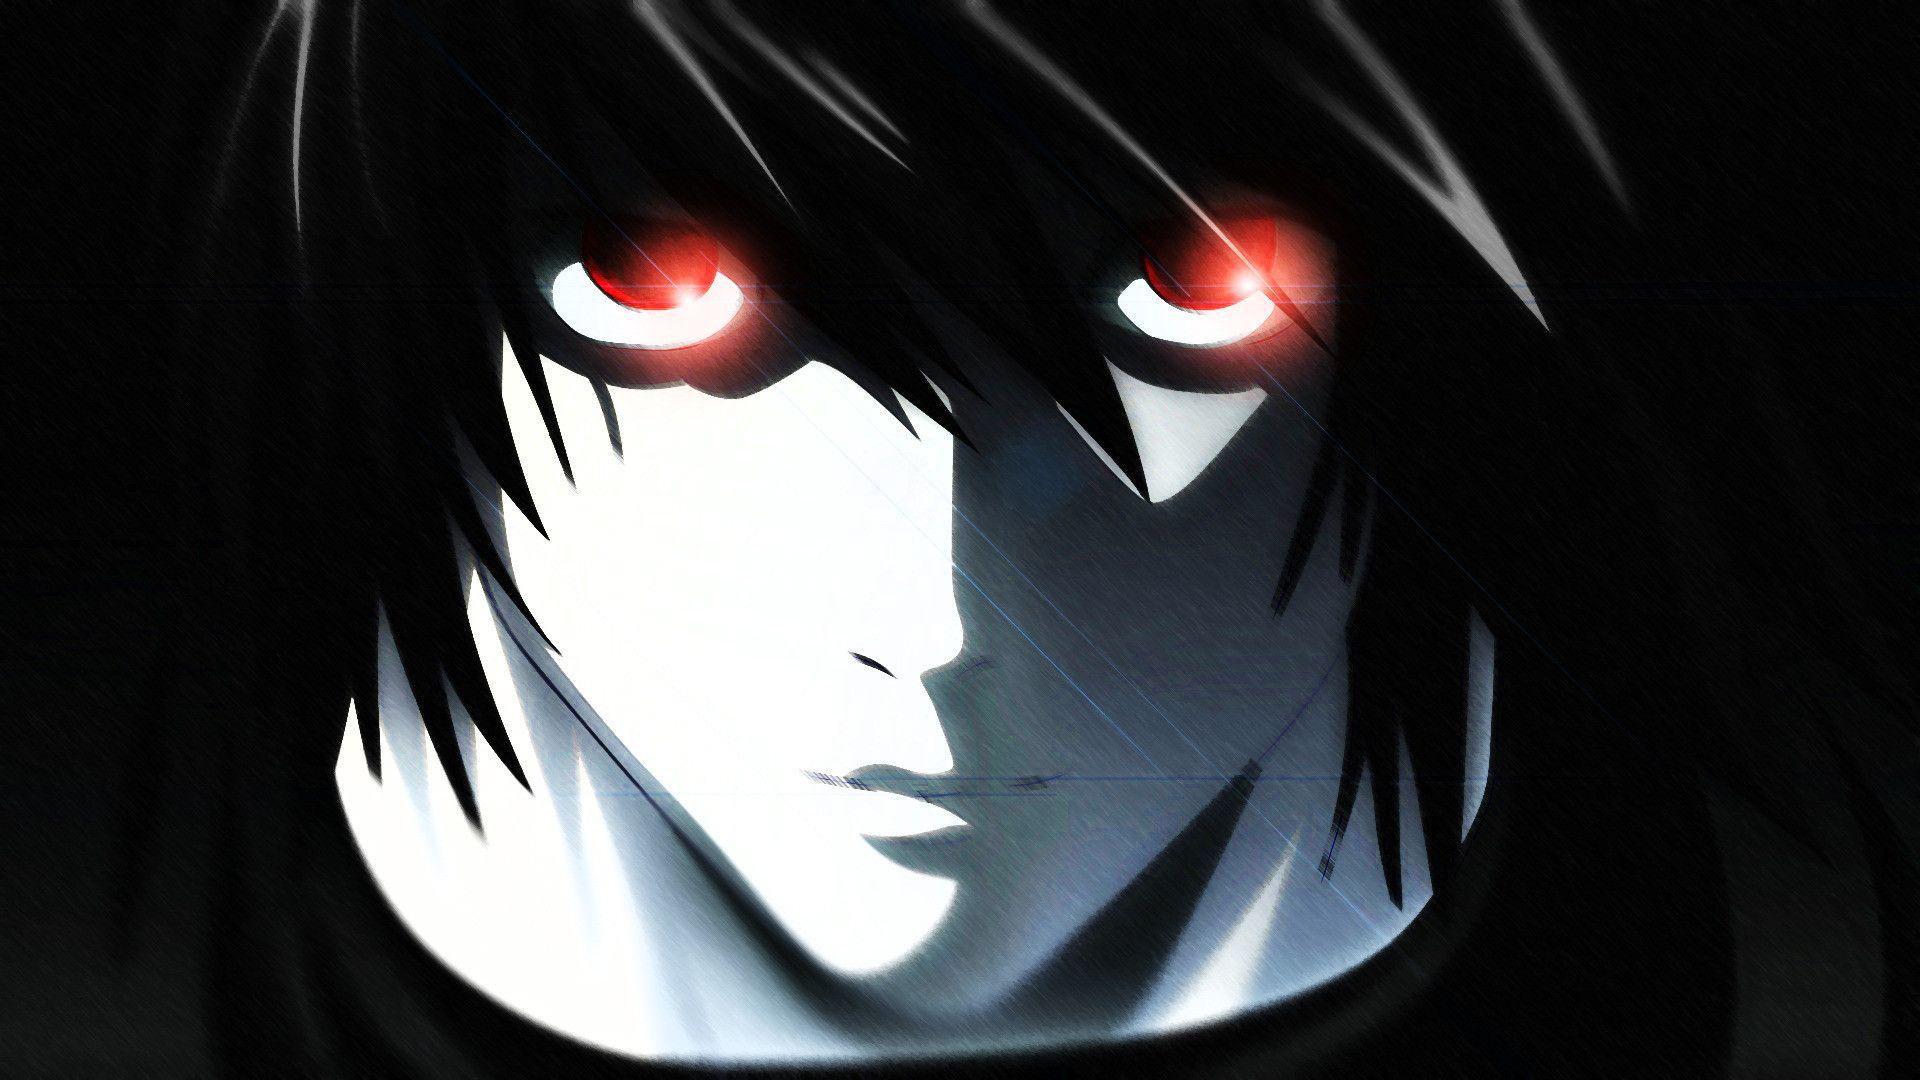 L Death Note Wallpaper Desktop We Have 55 Amazing Background Pictures Carefully Picked By Our